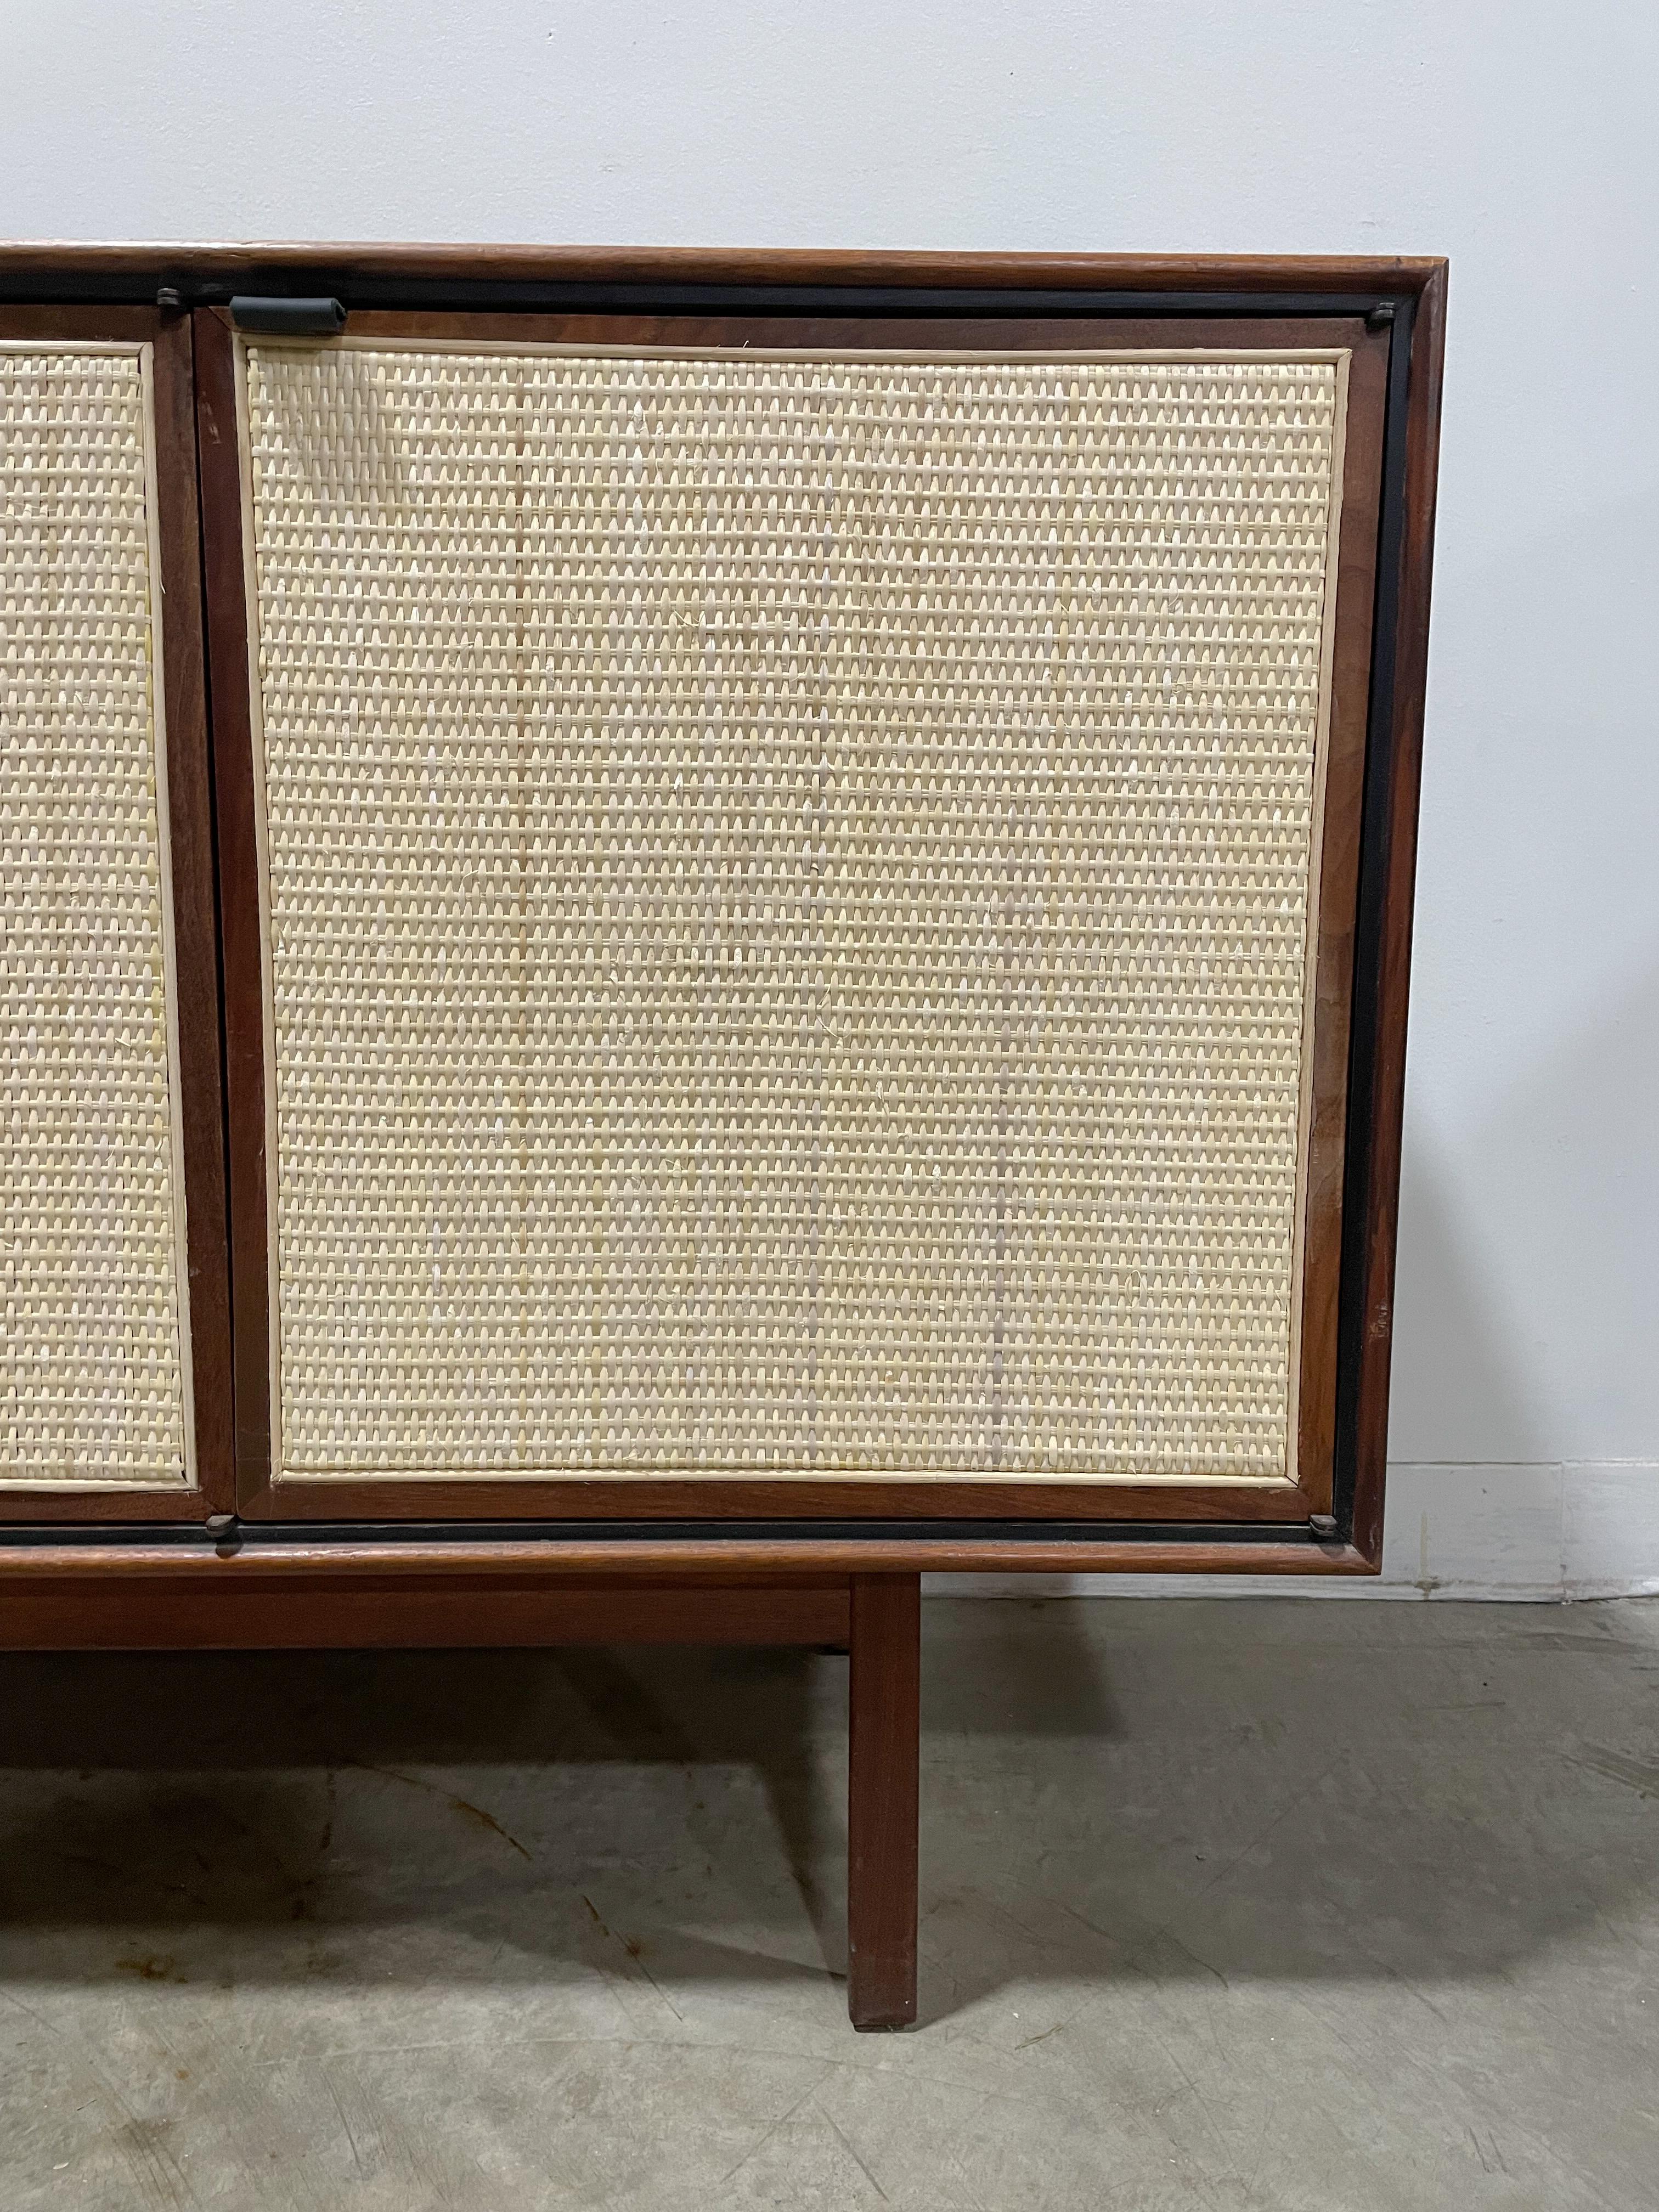 American Walnut and Cane Mid Century Modern Credenza by Founders